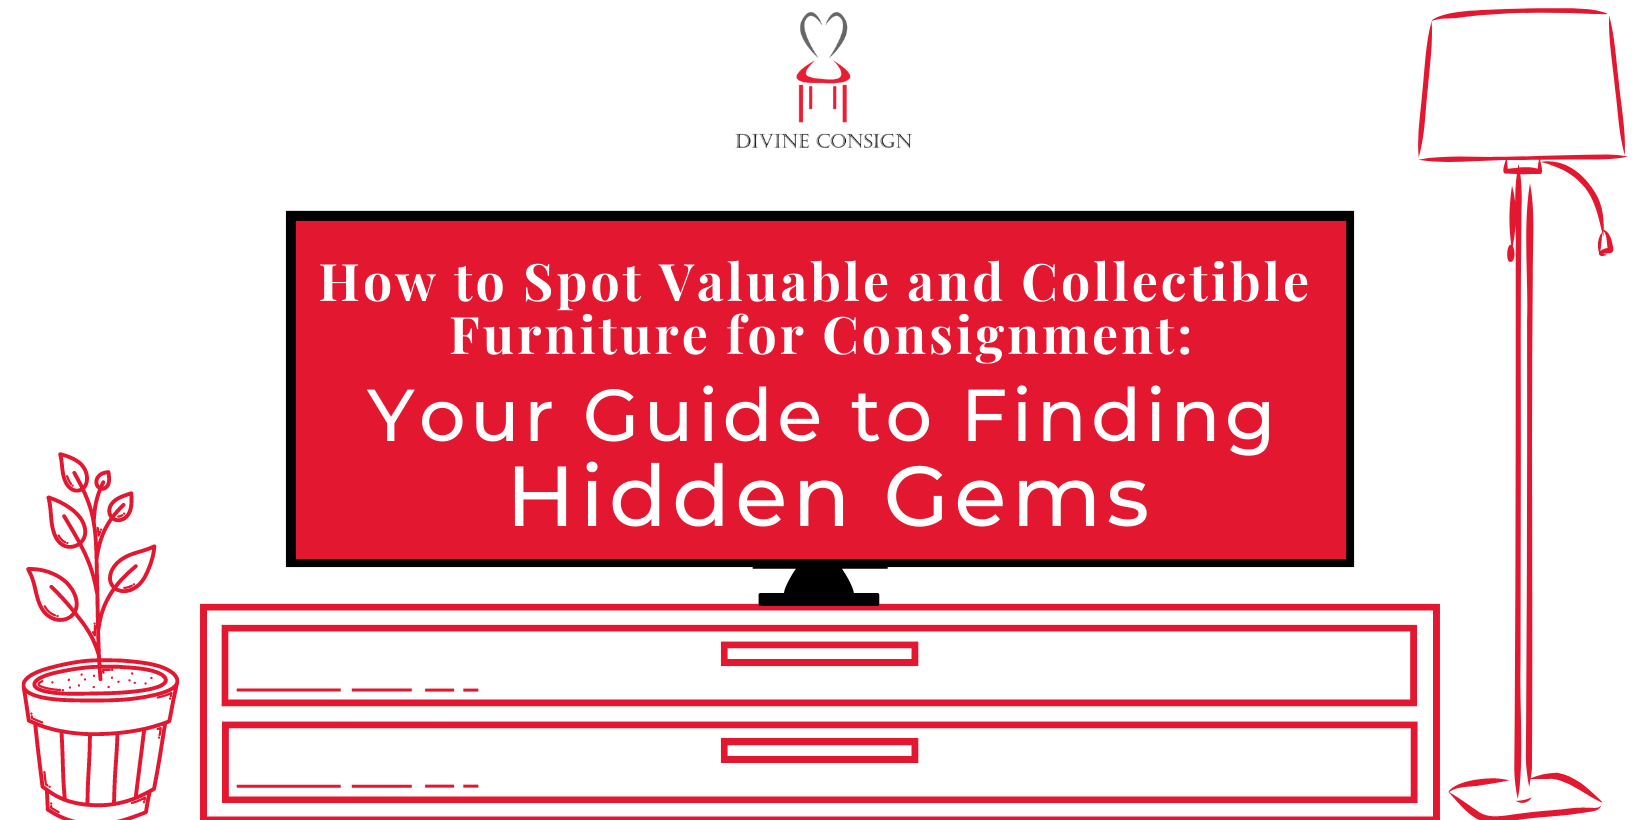 How to Spot Valuable and Collectible Furniture for Consignment: Your Guide to Finding Hidden Gems